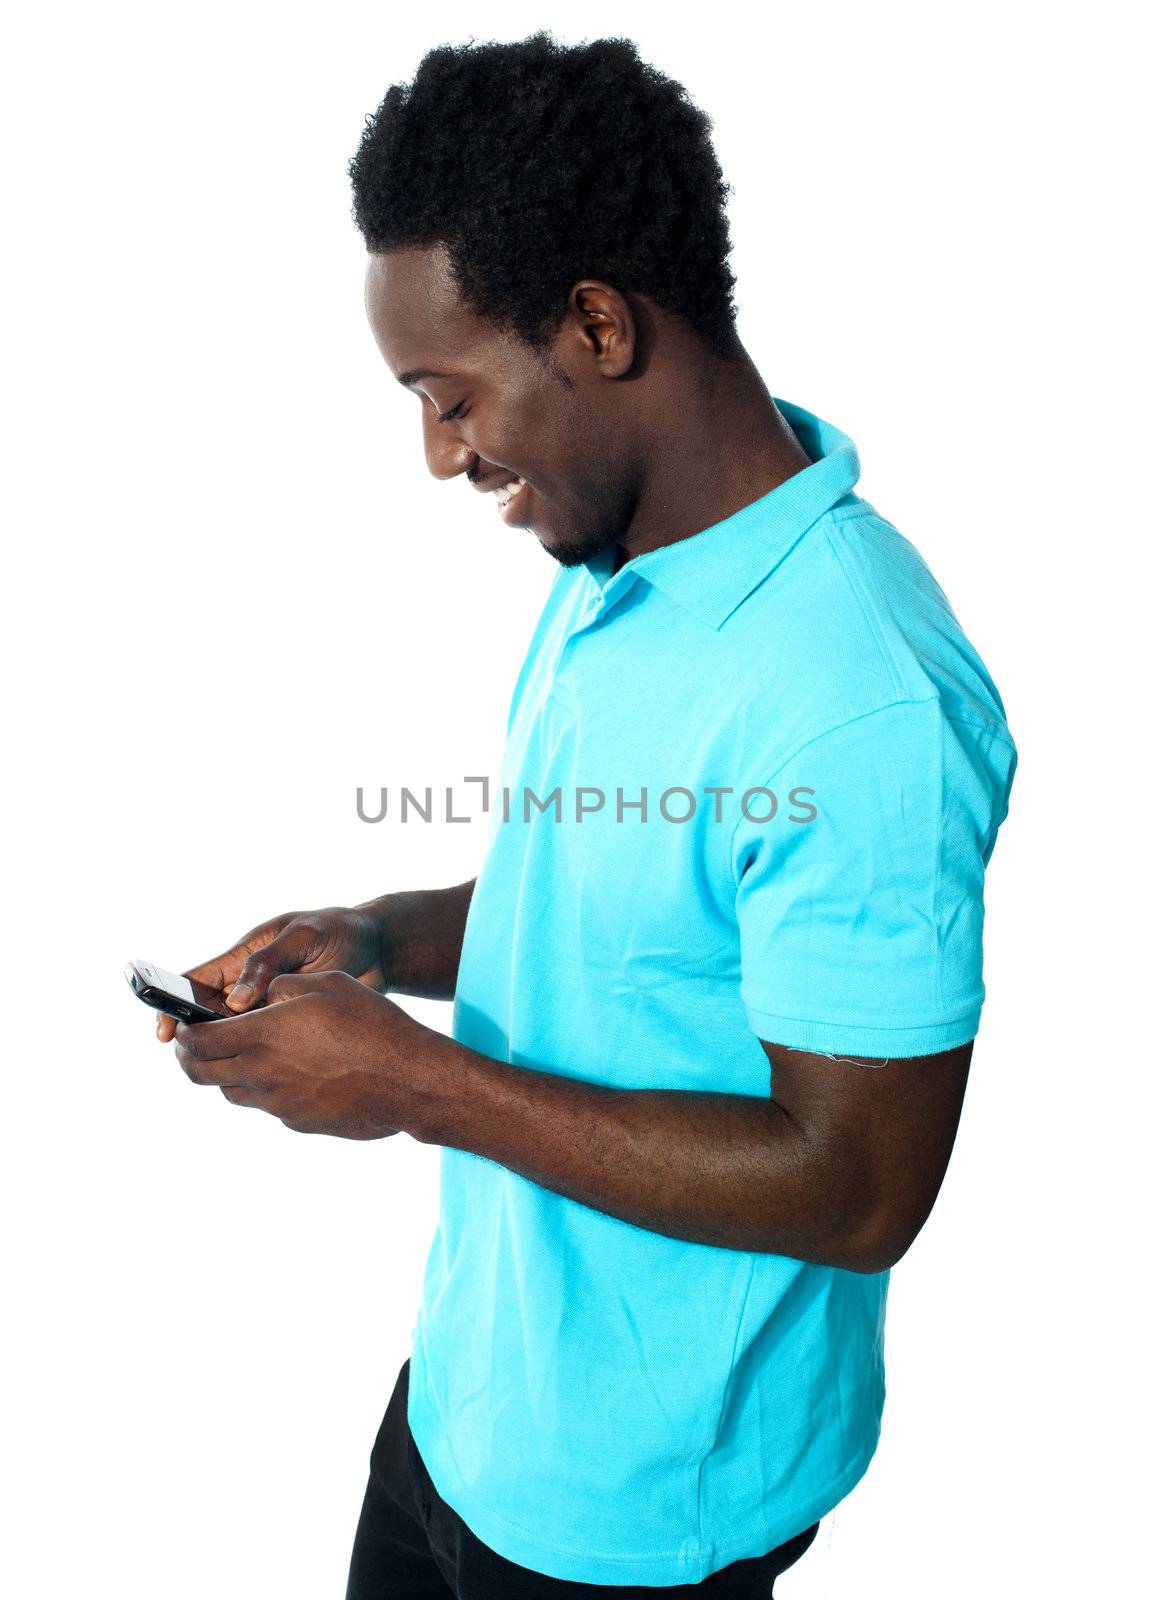 African boy busy messaging by stockyimages